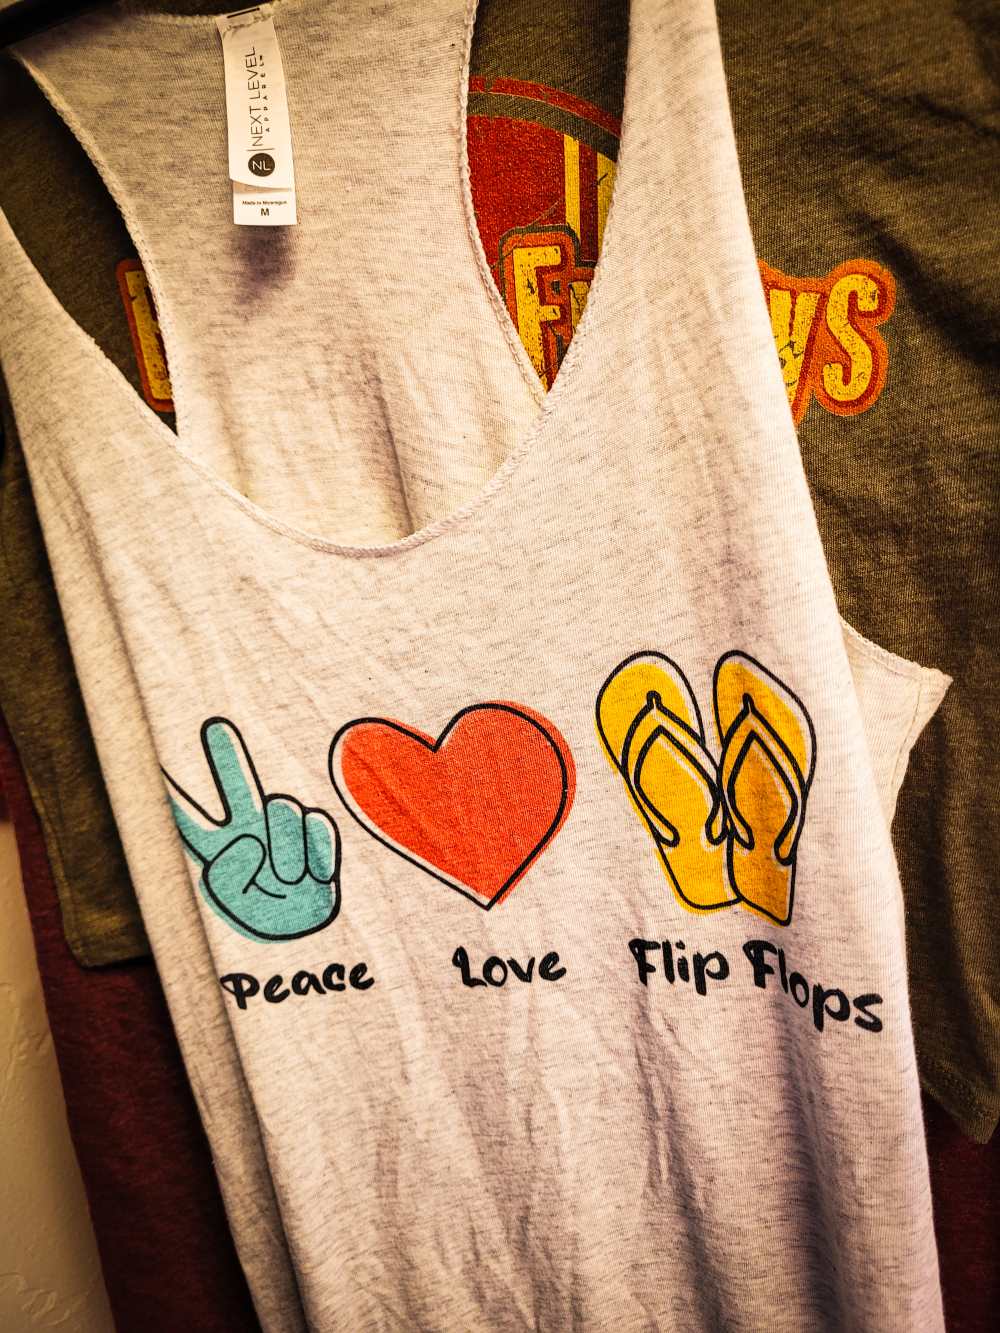 Embrace Summer Vibes with the "Peace, Love, Flip Flops" Raw Edge Tank Top by Next Level